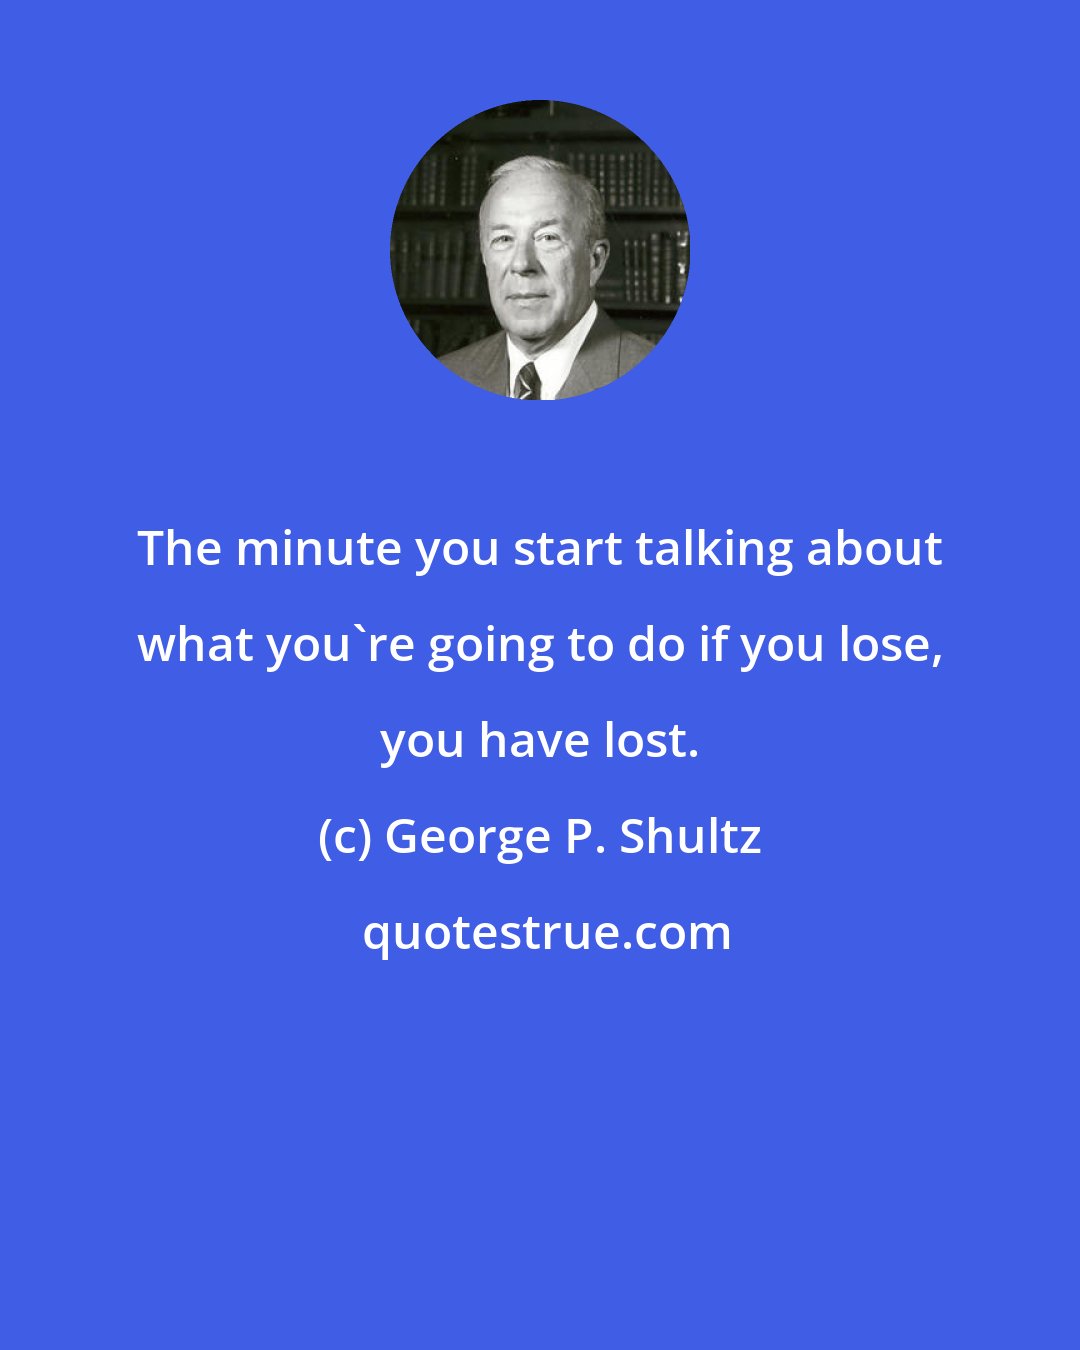 George P. Shultz: The minute you start talking about what you're going to do if you lose, you have lost.